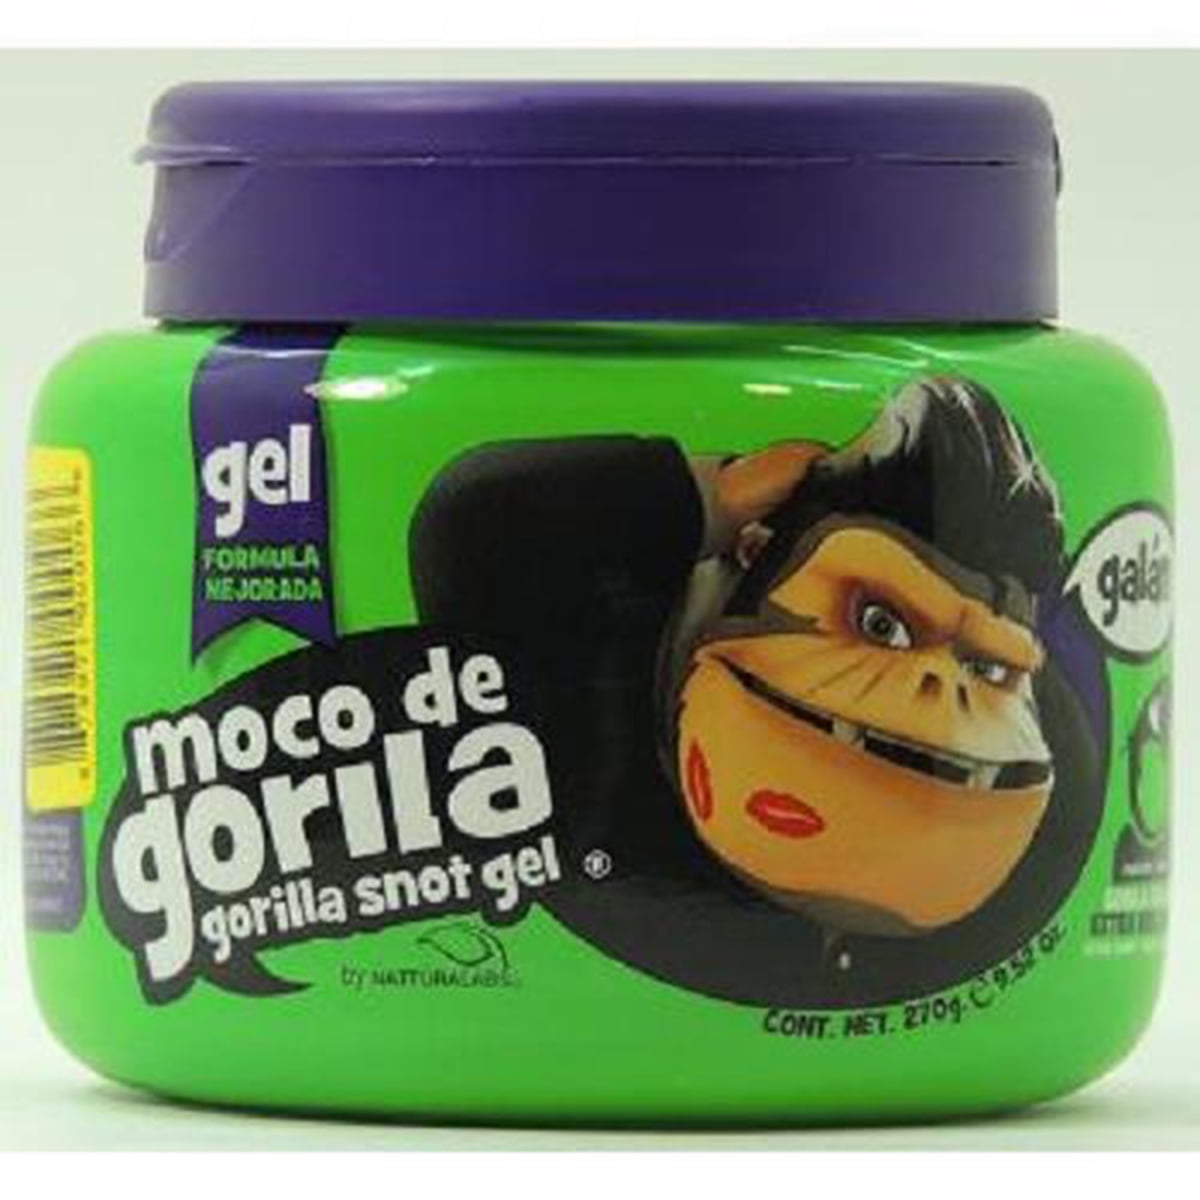 does gorilla snot gel cause hair loss